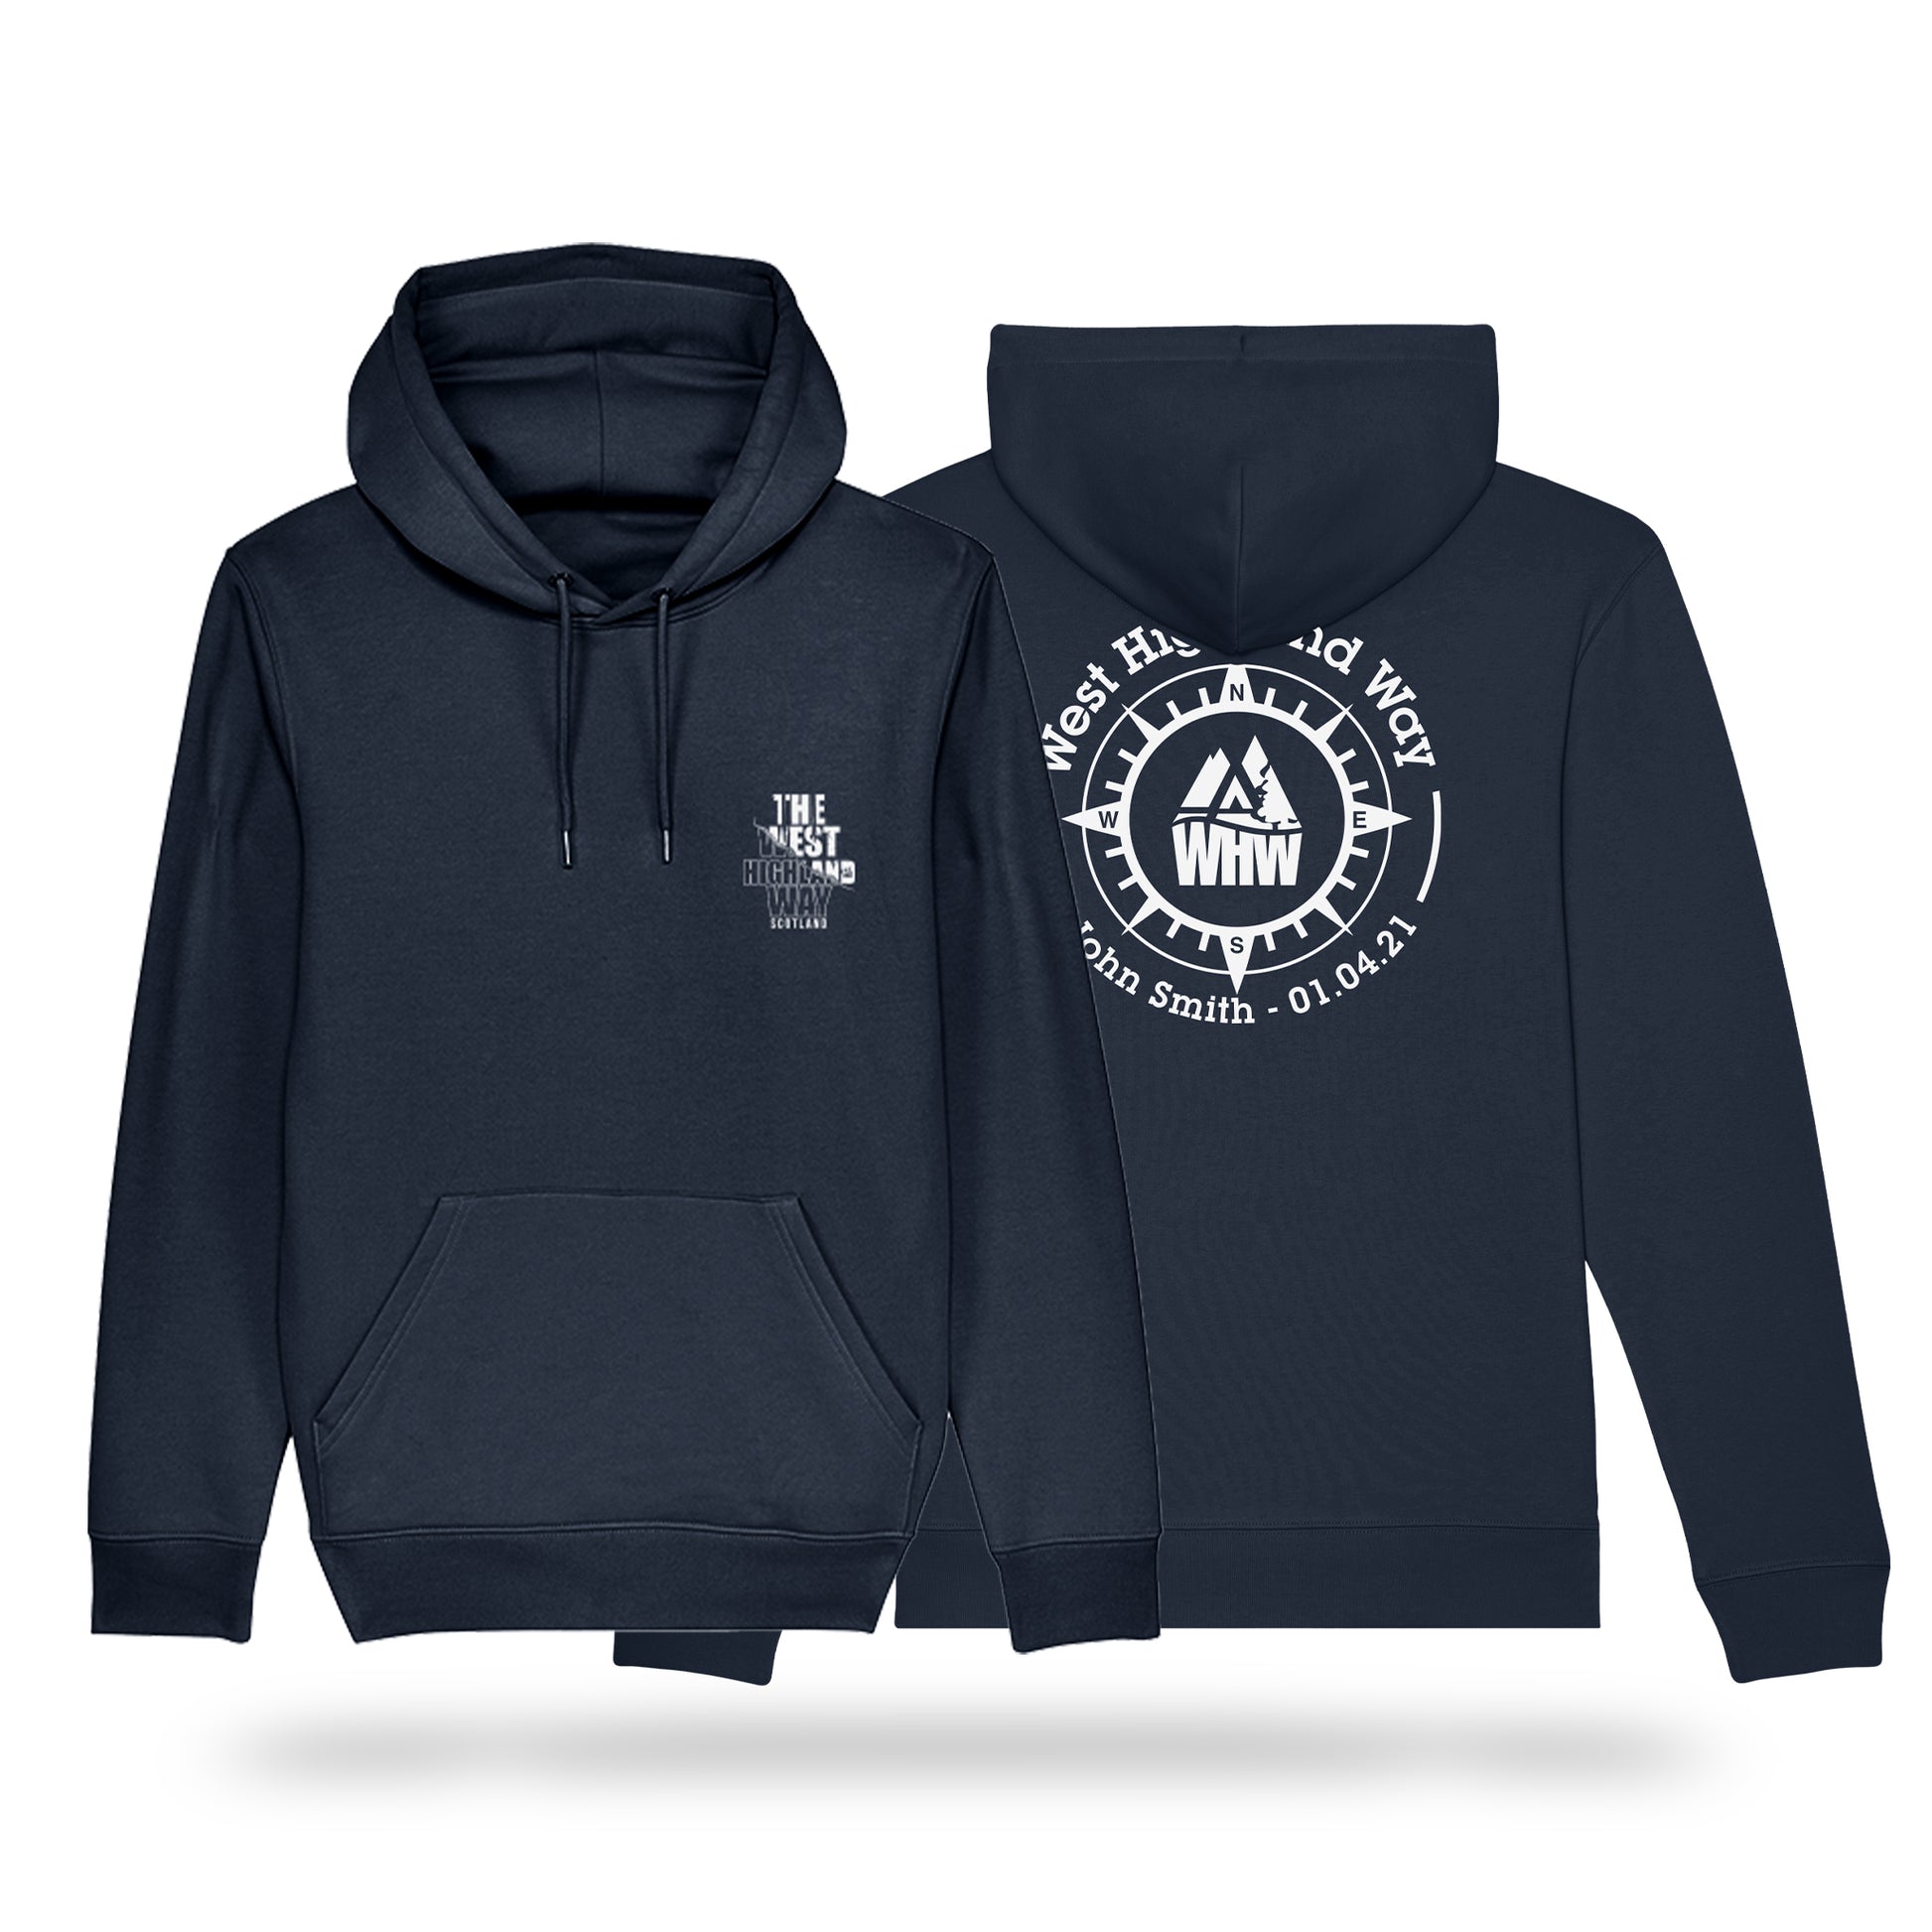 Black West Highland Way Personalised Compass hoodies showing chest and back prints 